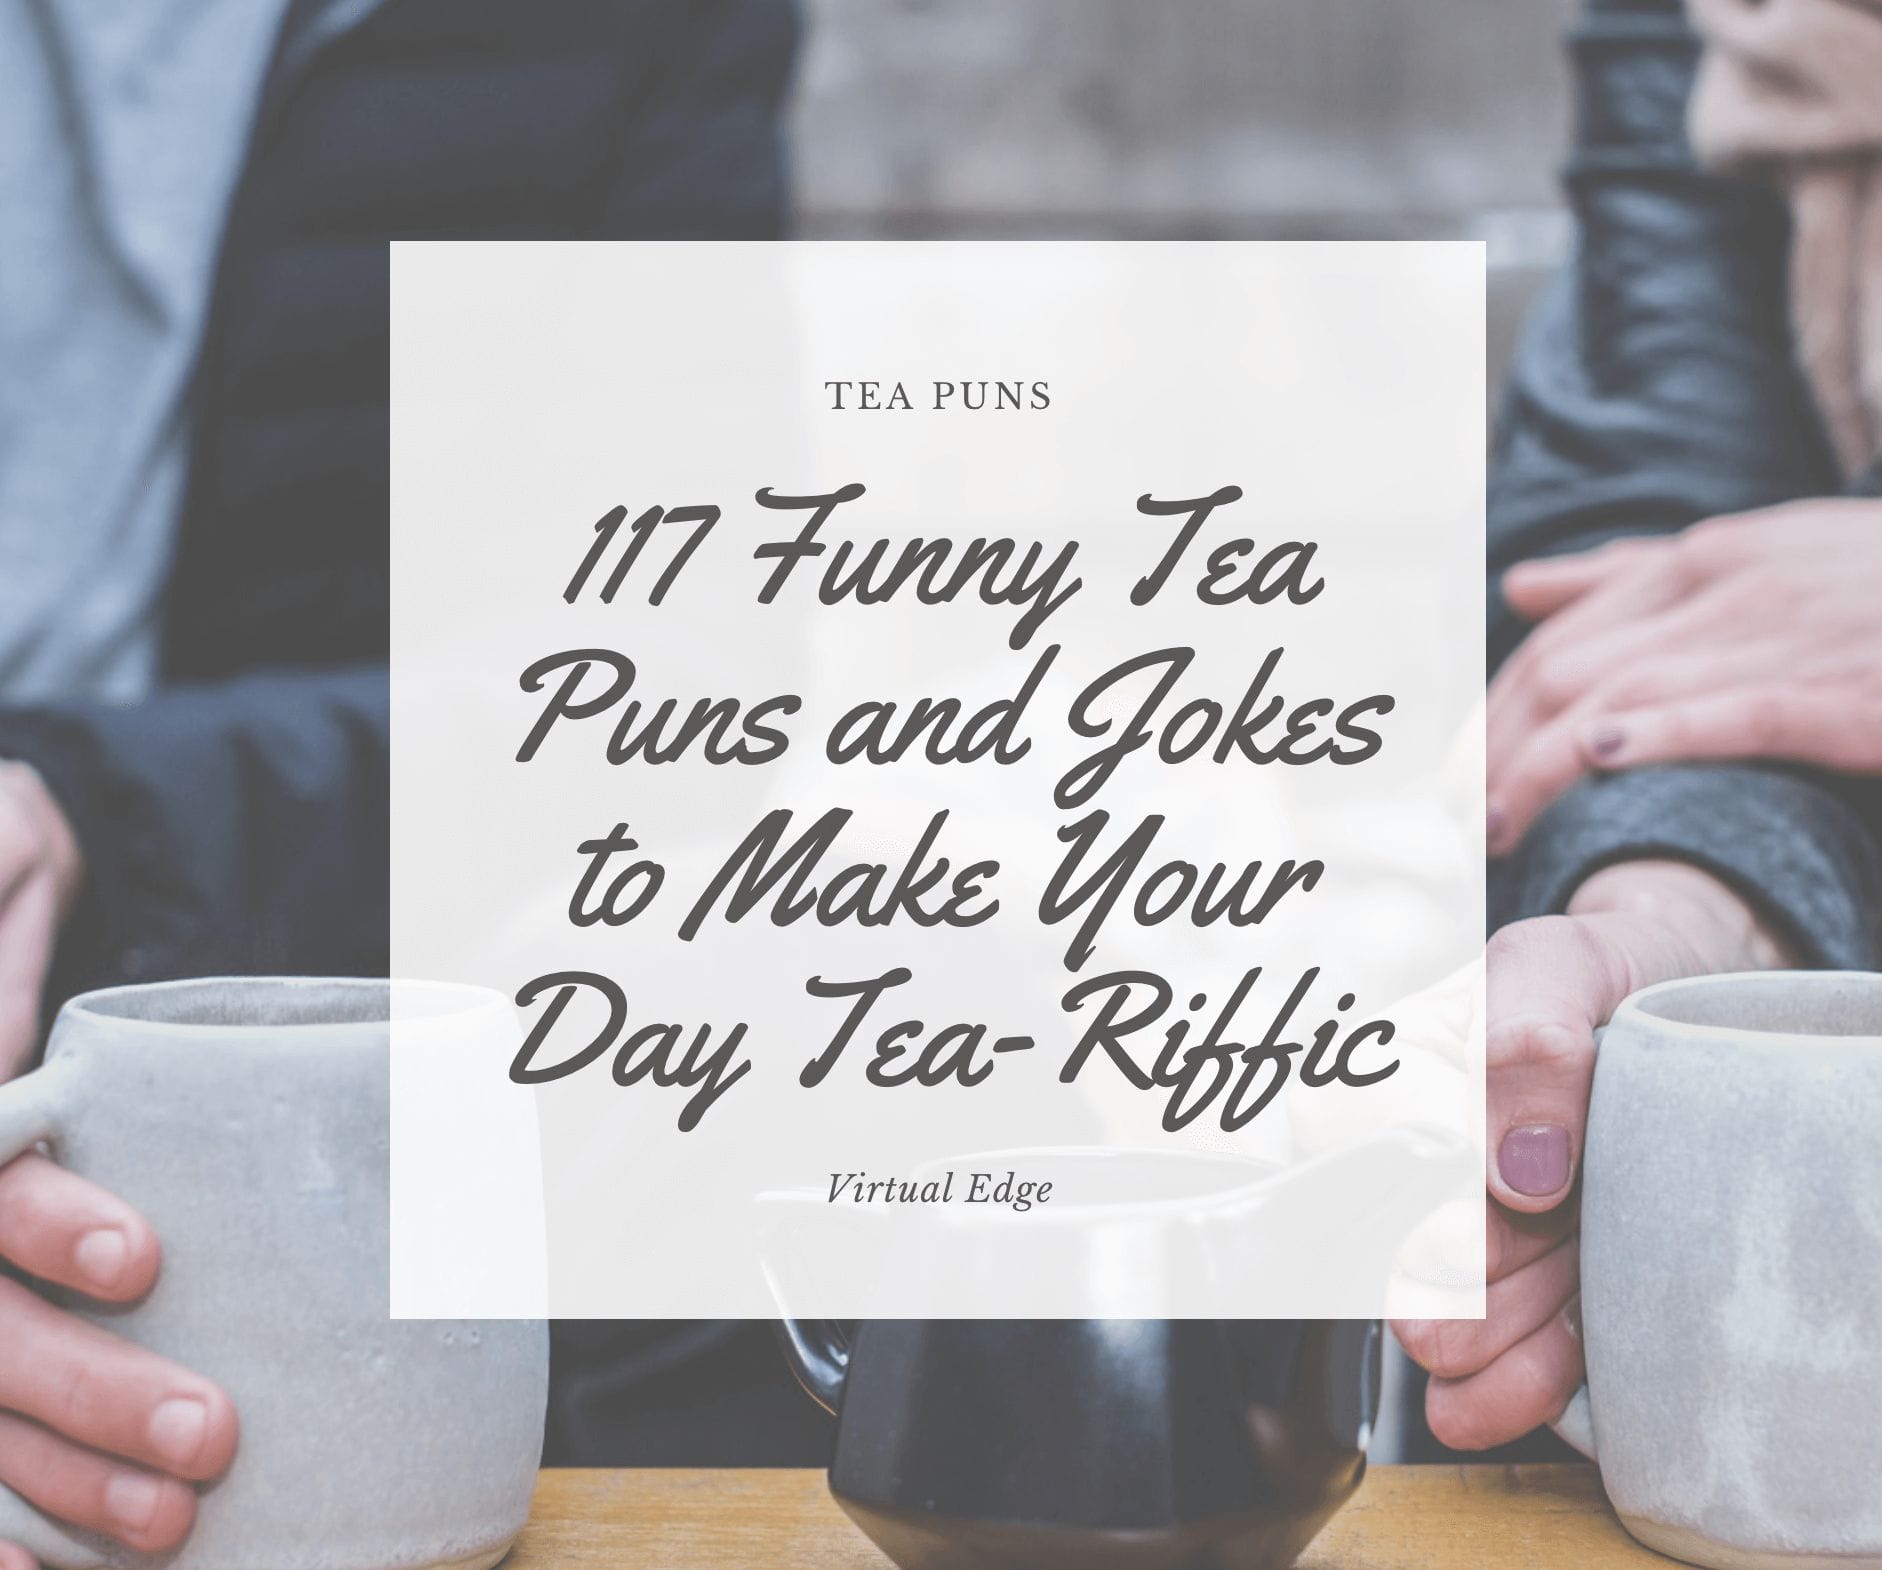 117 Funny Tea Puns and Jokes to Make Your Day Tea-Riffic